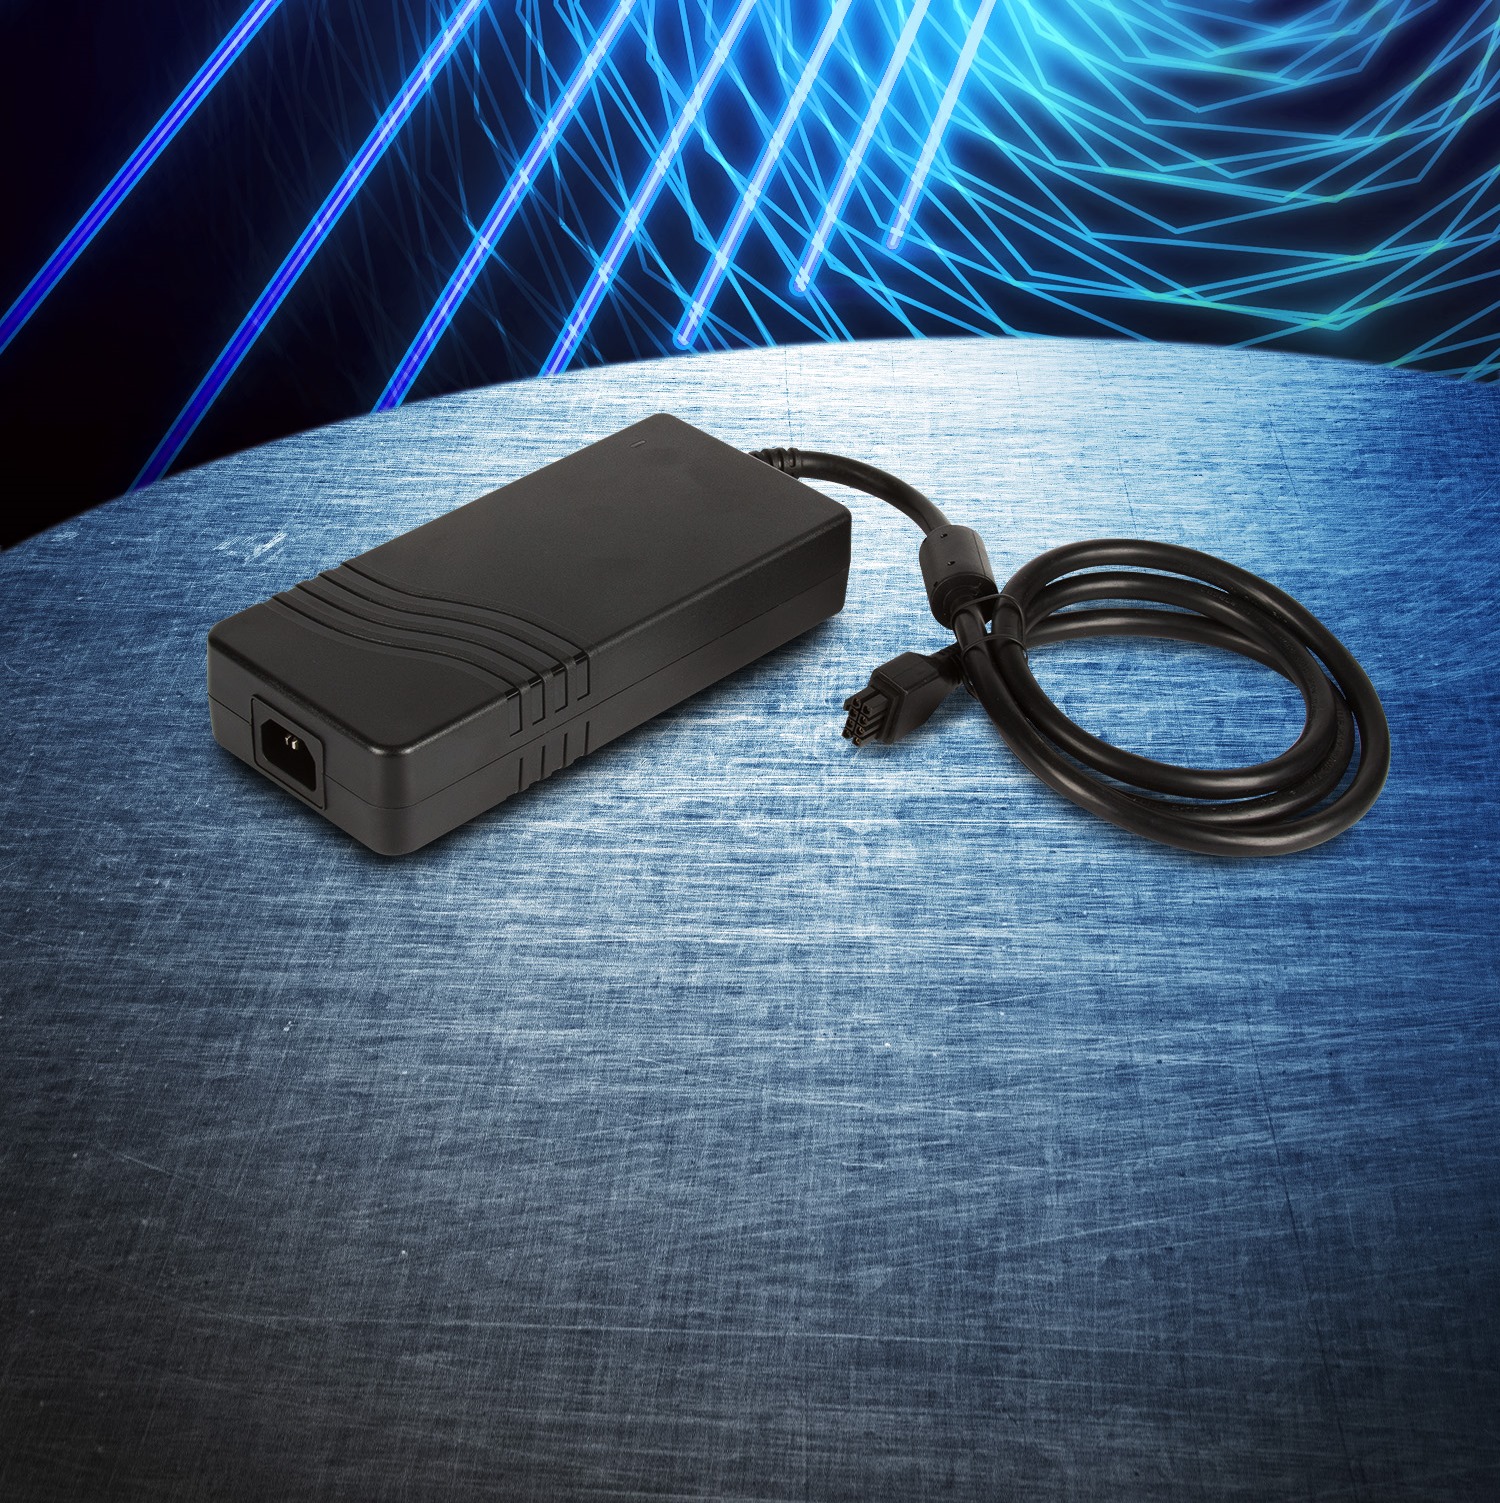 180W and 220W Highly Efficient, Desktop Power Supplies